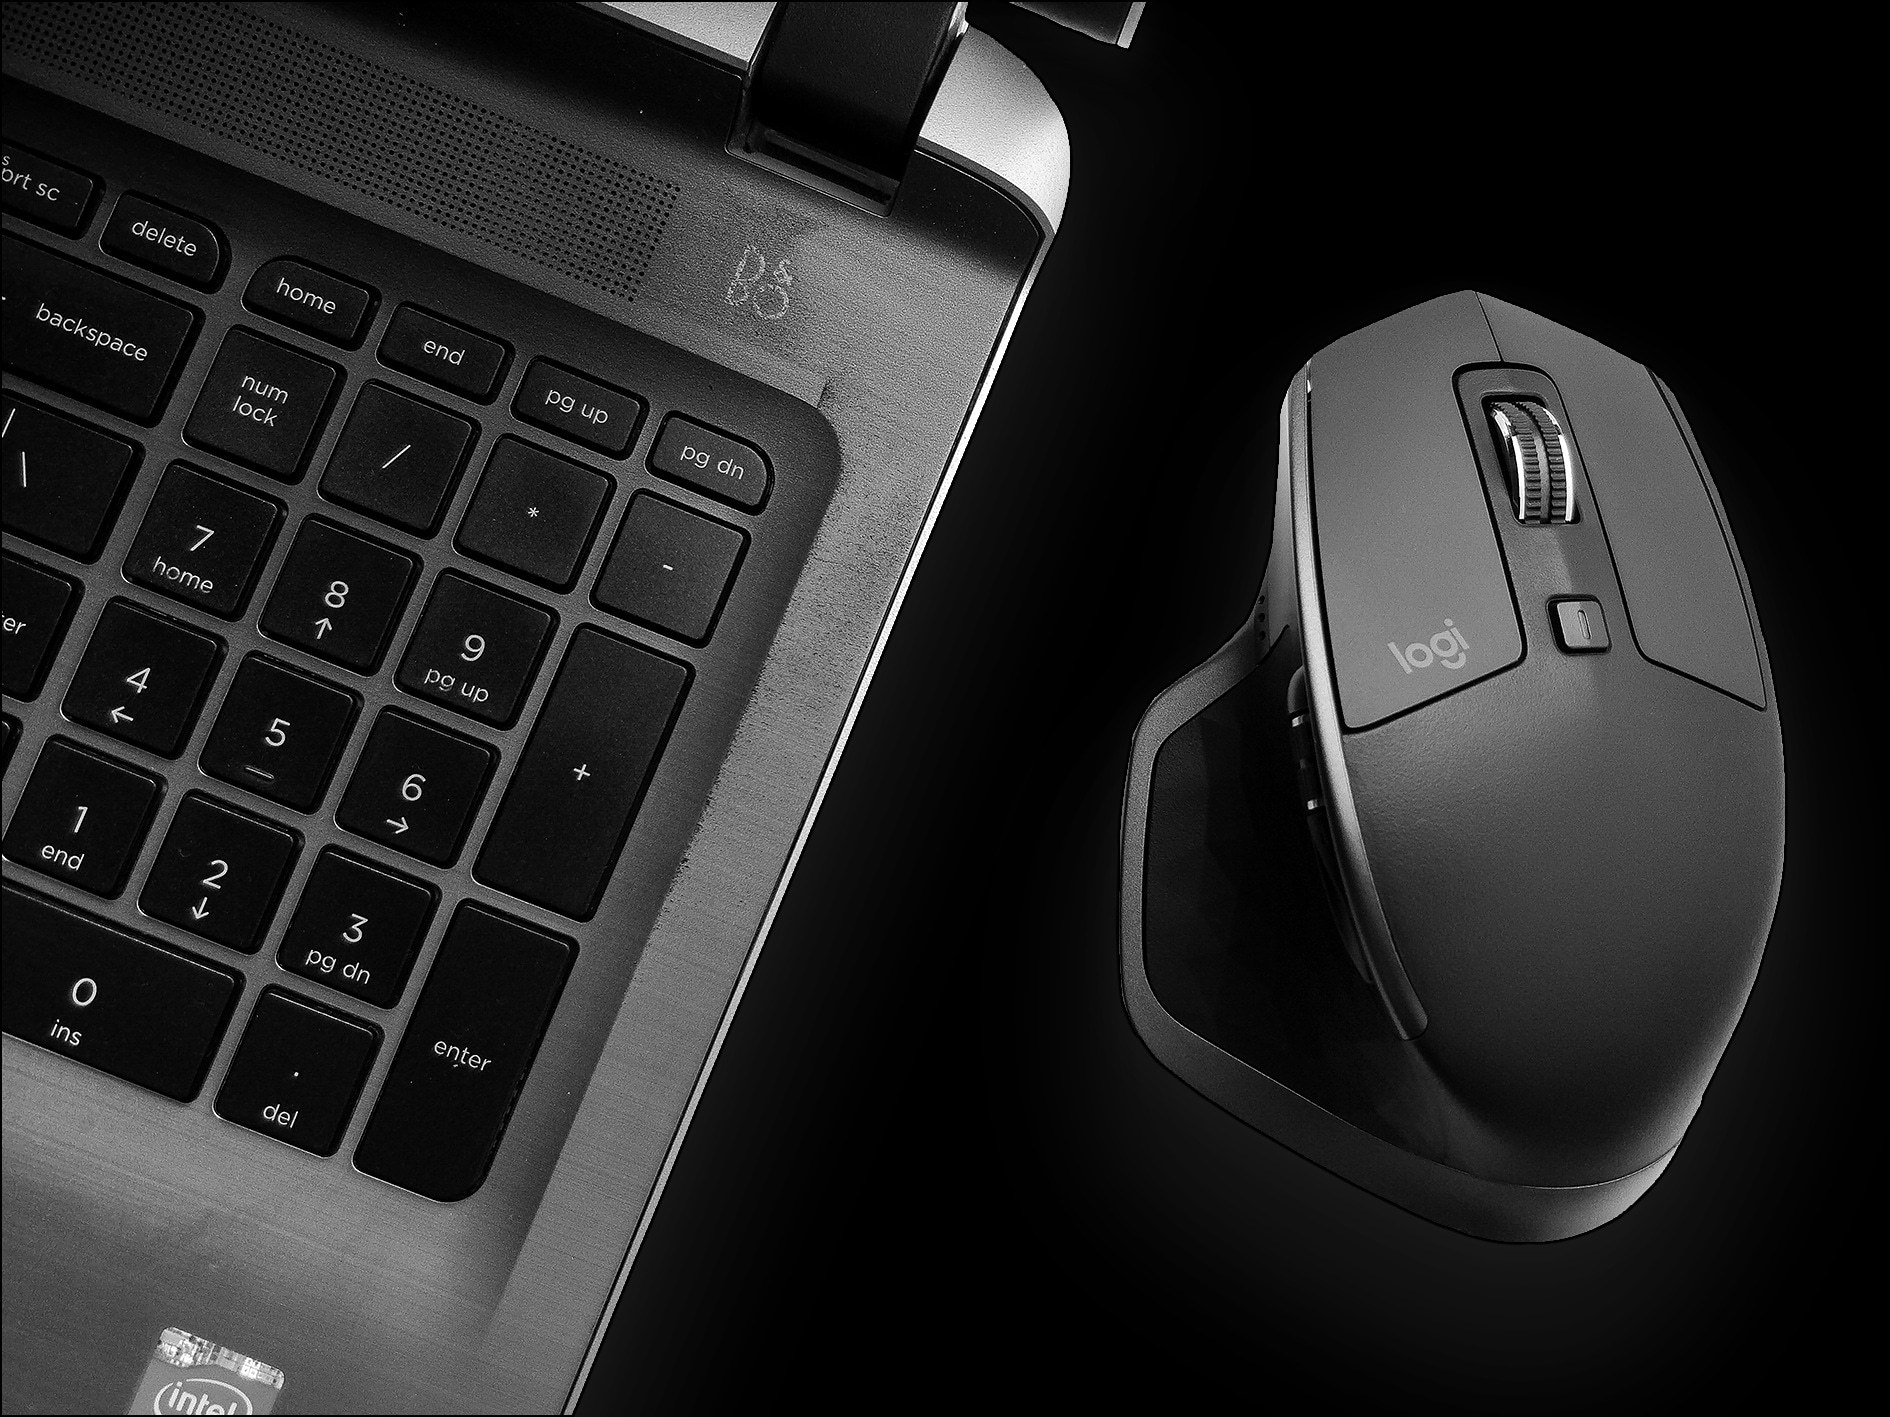 Dell Laptop and Logitech MX Master 2S - Captured Using A Smartphone